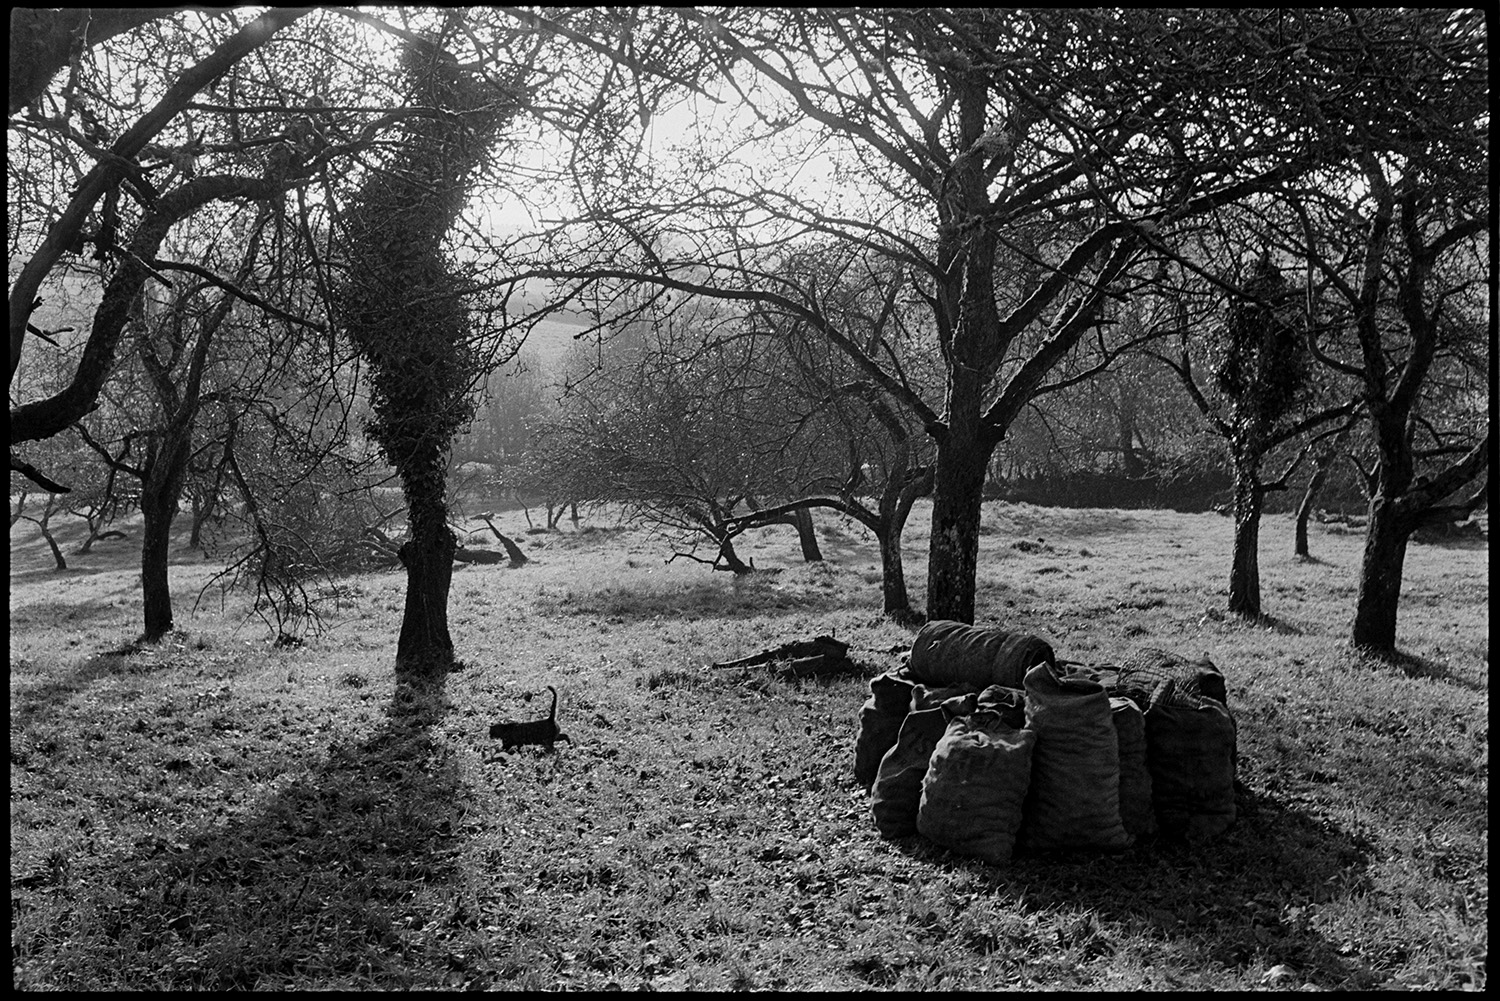 Cider orchard, man picking up apples and bagging them up.
[A cider orchard at Westpark, Iddesleigh. There are full sacks of apples stacked around a tree in the foreground A cat is walking through the grass.]